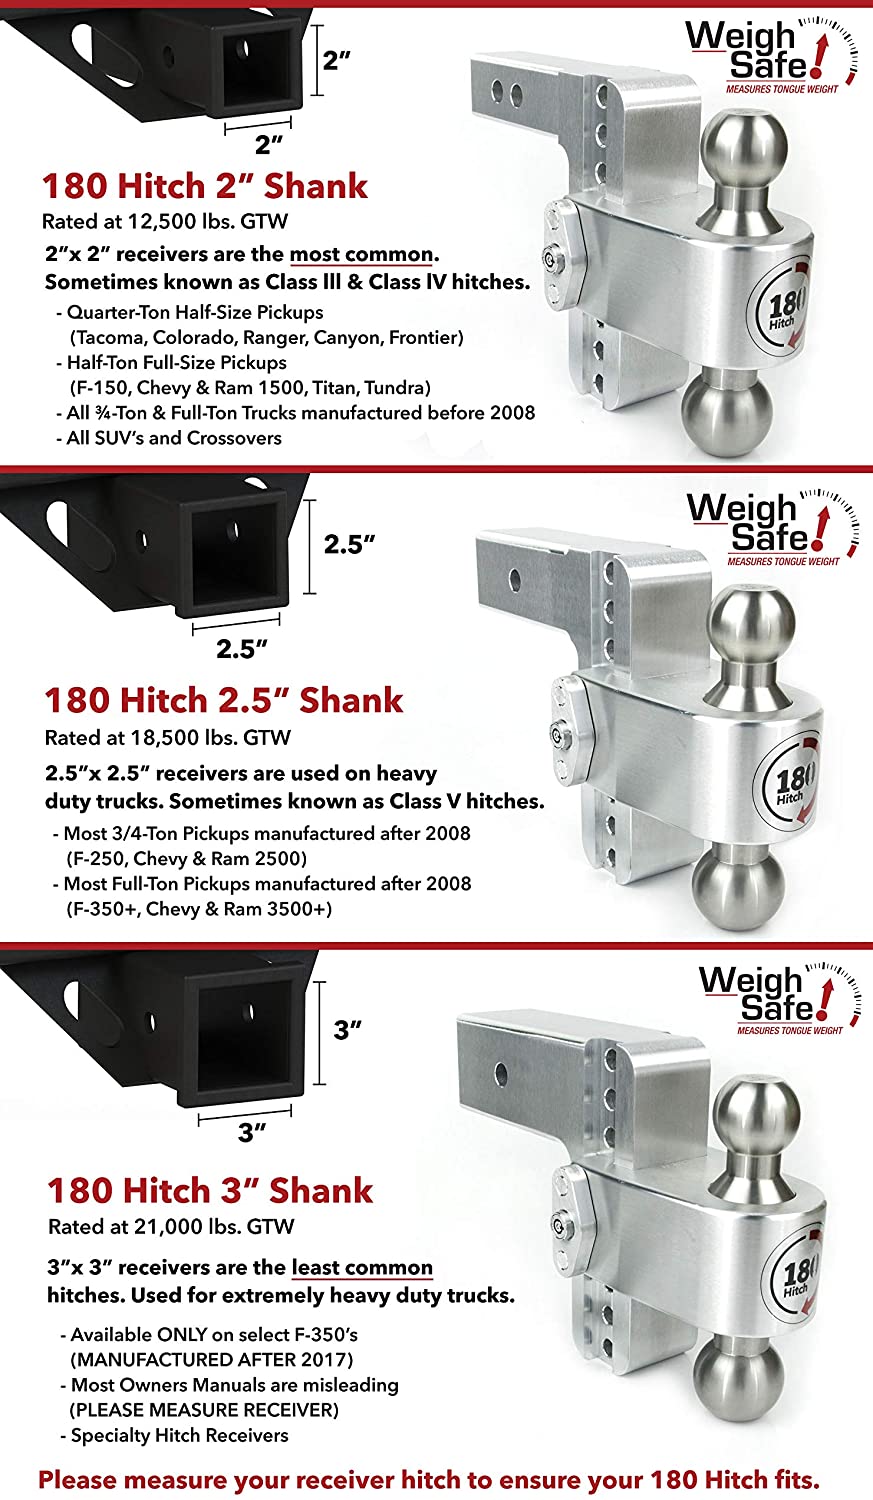 2 & 2-5/16 Weigh Safe CTB4-2.5 and a Double-pin Key Lock Chrome Plated Steel Combo Ball 4 Drop 180 Hitch w/ 2.5 Shank/Shaft Adjustable Aluminum Trailer Hitch & Ball Mount